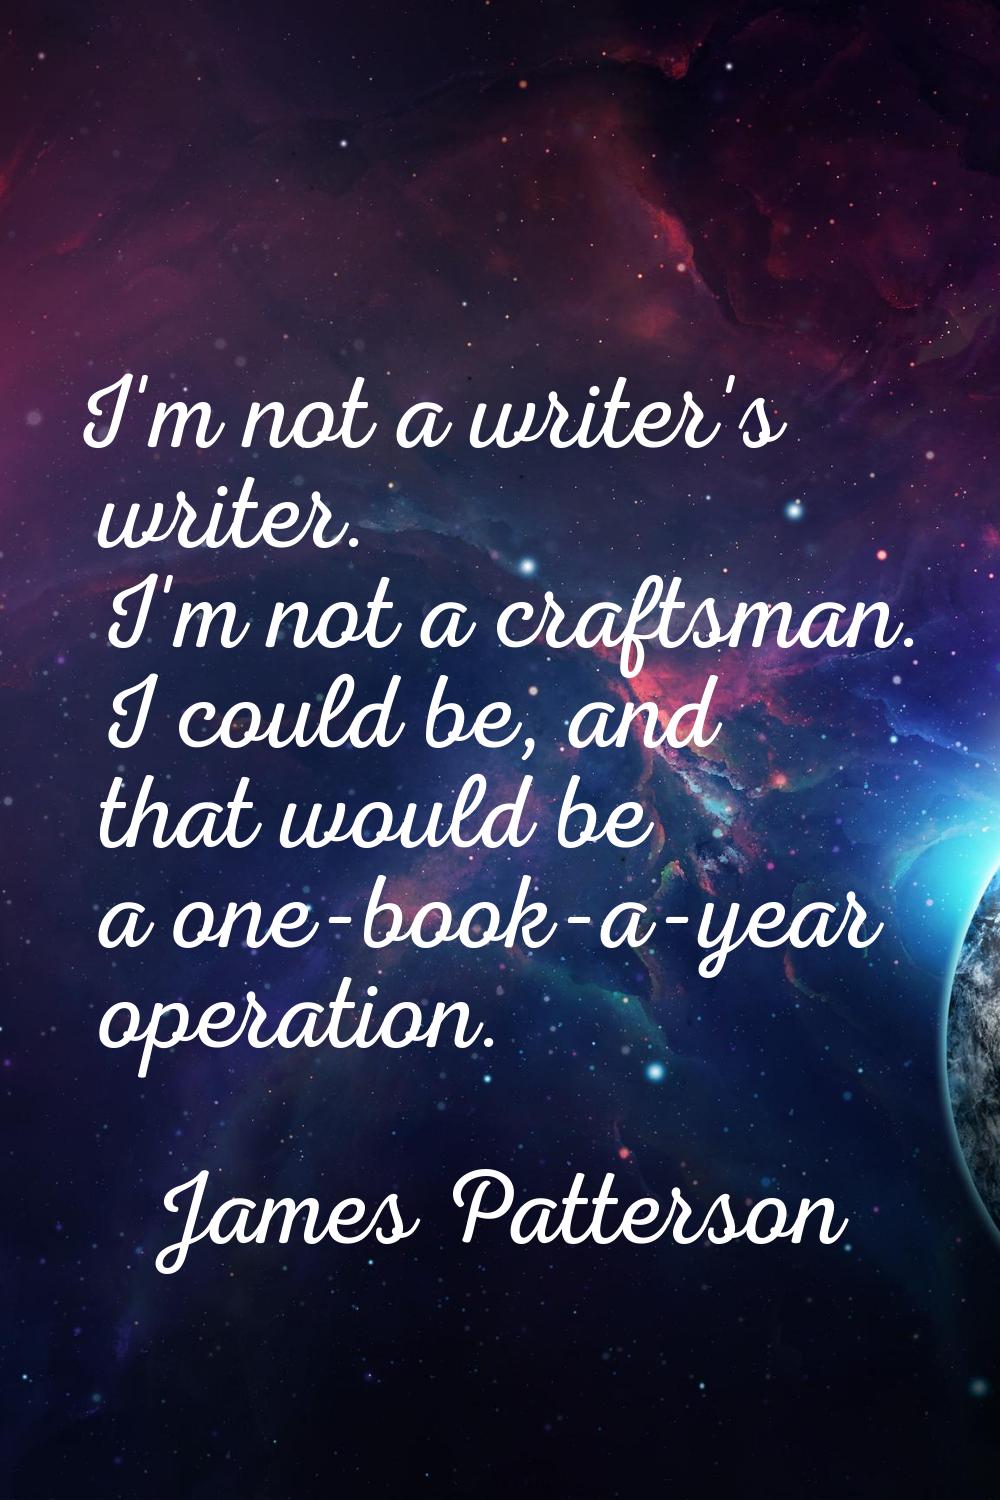 I'm not a writer's writer. I'm not a craftsman. I could be, and that would be a one-book-a-year ope